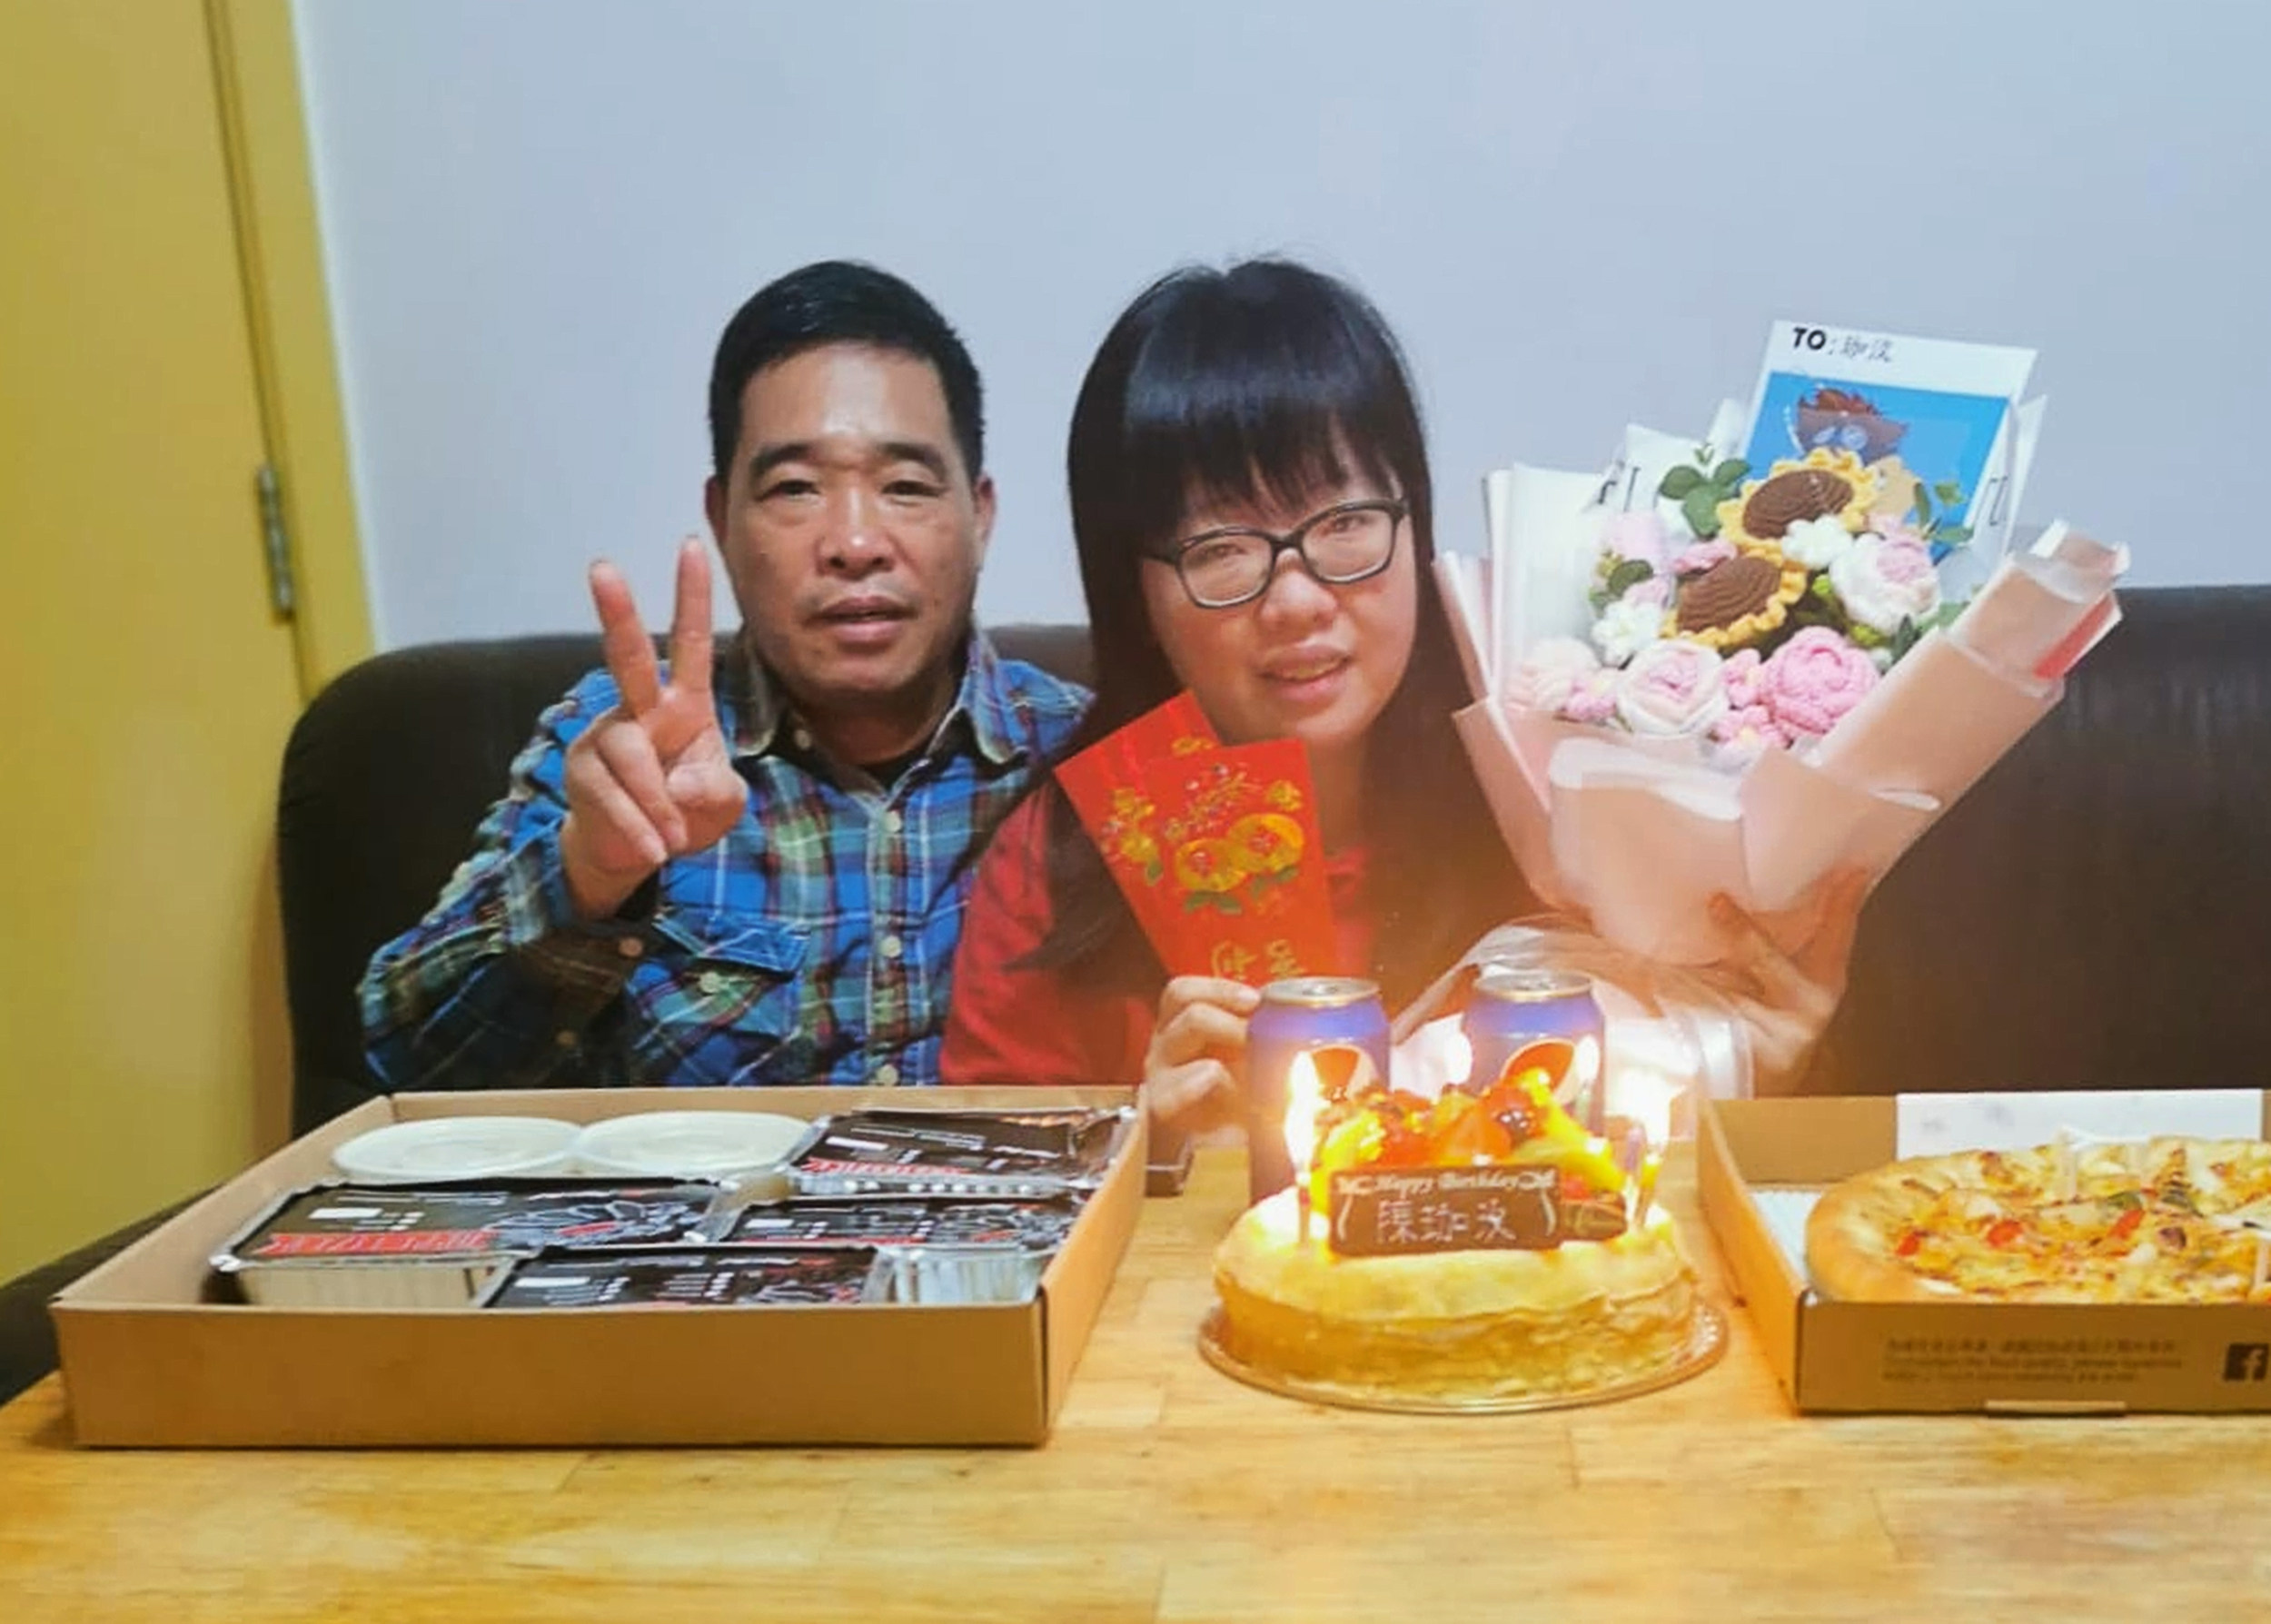 Yuki Chan celebrates her birthday with her father, Steven Chan. Photo: Handout